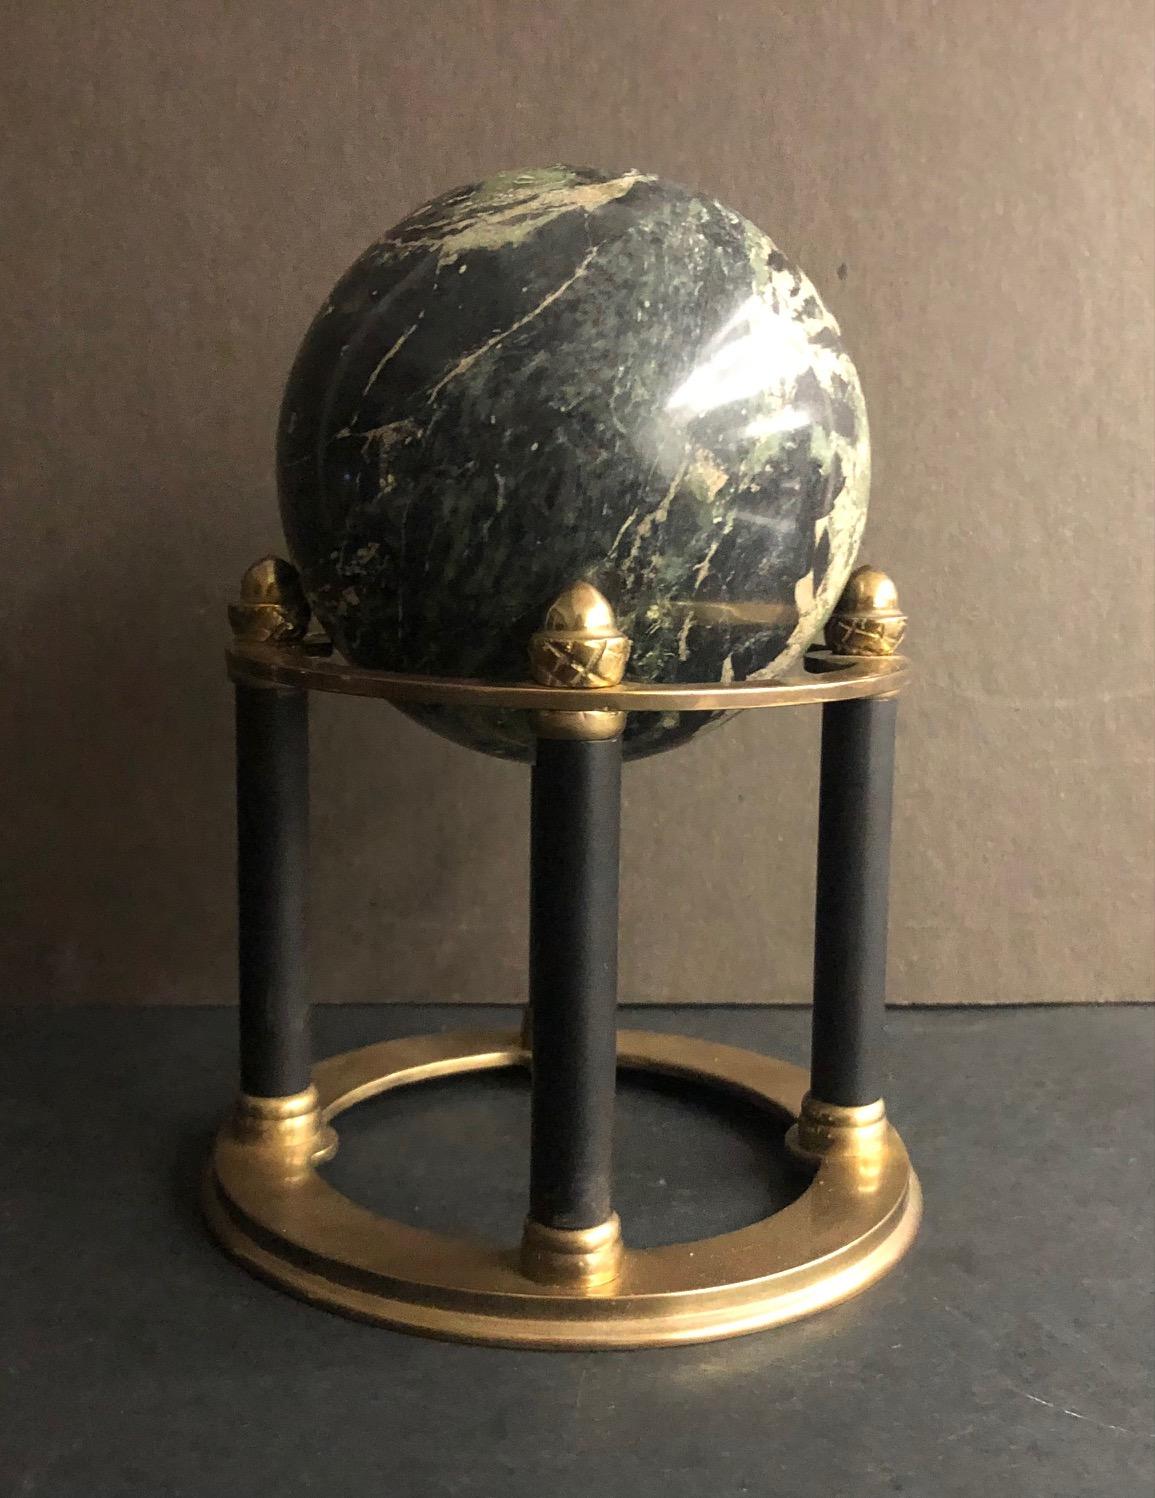 Sphere on stand measures approximately 7.5 x 4.5 inches. Sphere measures approximately 4 x 3 inches. Good Condition. The date of creation is unknown, but is believed to be within the Early-Mid 20th Century. 